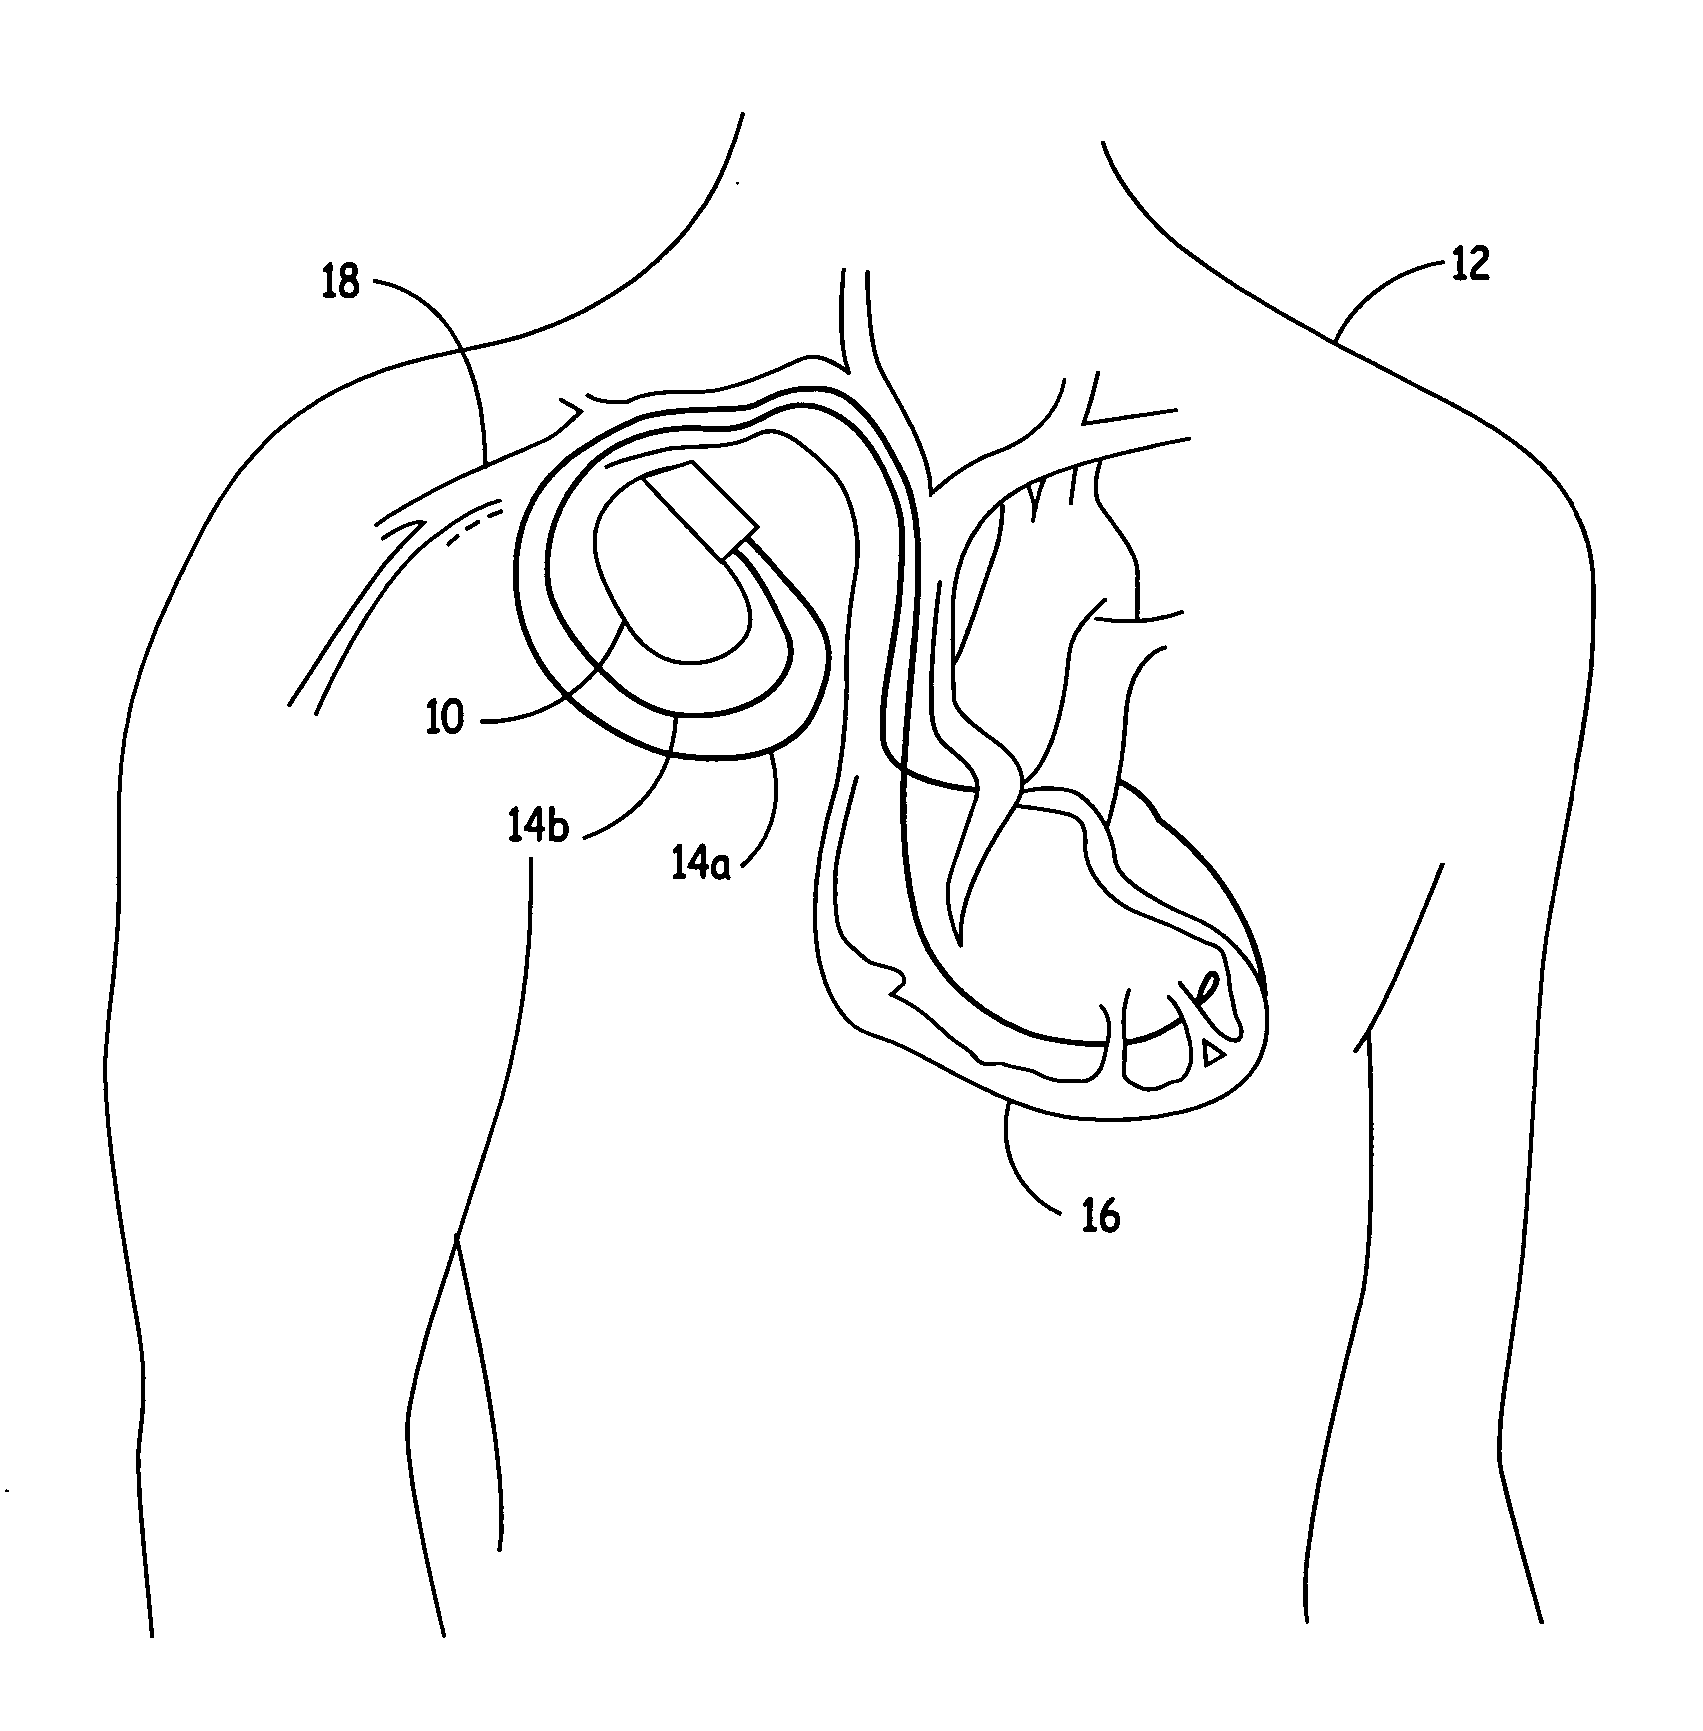 Lead-carried proximal electrode for quadripolar transthoracic impedance monitoring